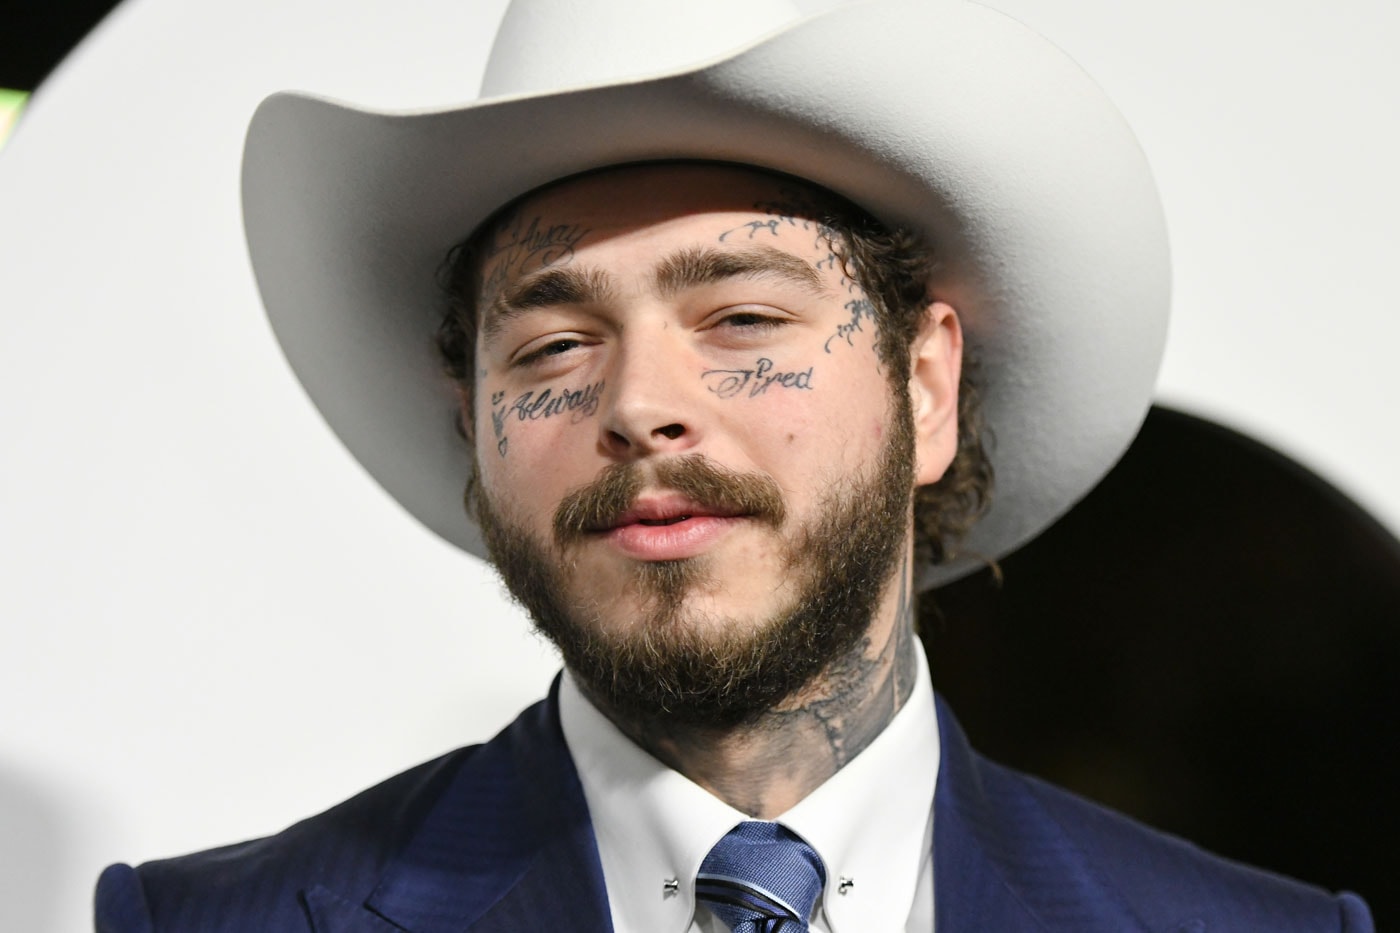 Post Malone's 'Twelve Carat Toothache' Album Is on Track To Earning the Top Spot on Billboard 200 first week projections album stoney hollywood's bleeding gunna doja cat roddy ricch the weeknd the kid laroi 